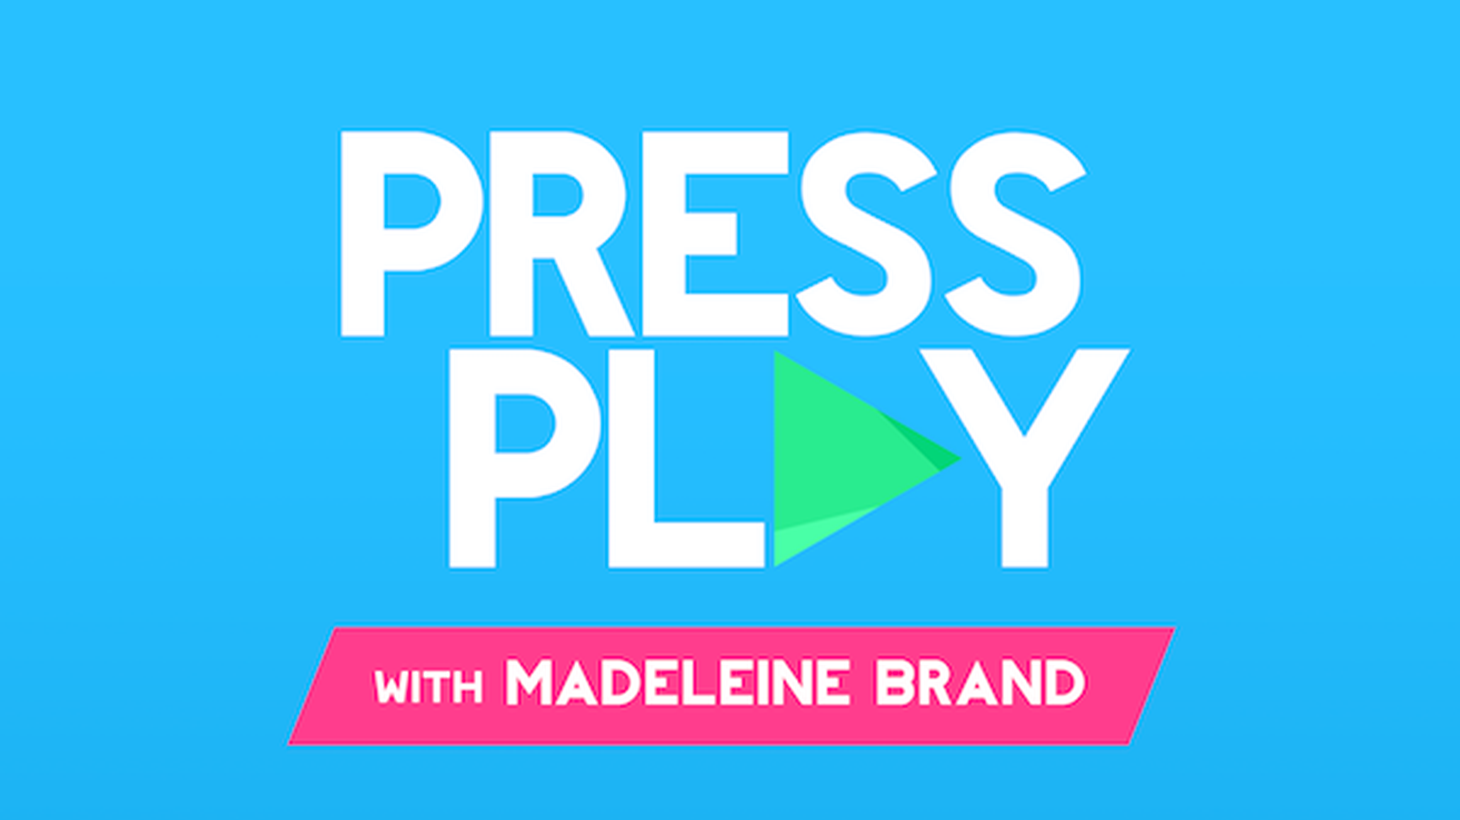 Today on Press Play, we take a look at the first trial over force feeding at Guantanamo Bay. Plus, we discuss the fight over history lessons in a Colorado school district.